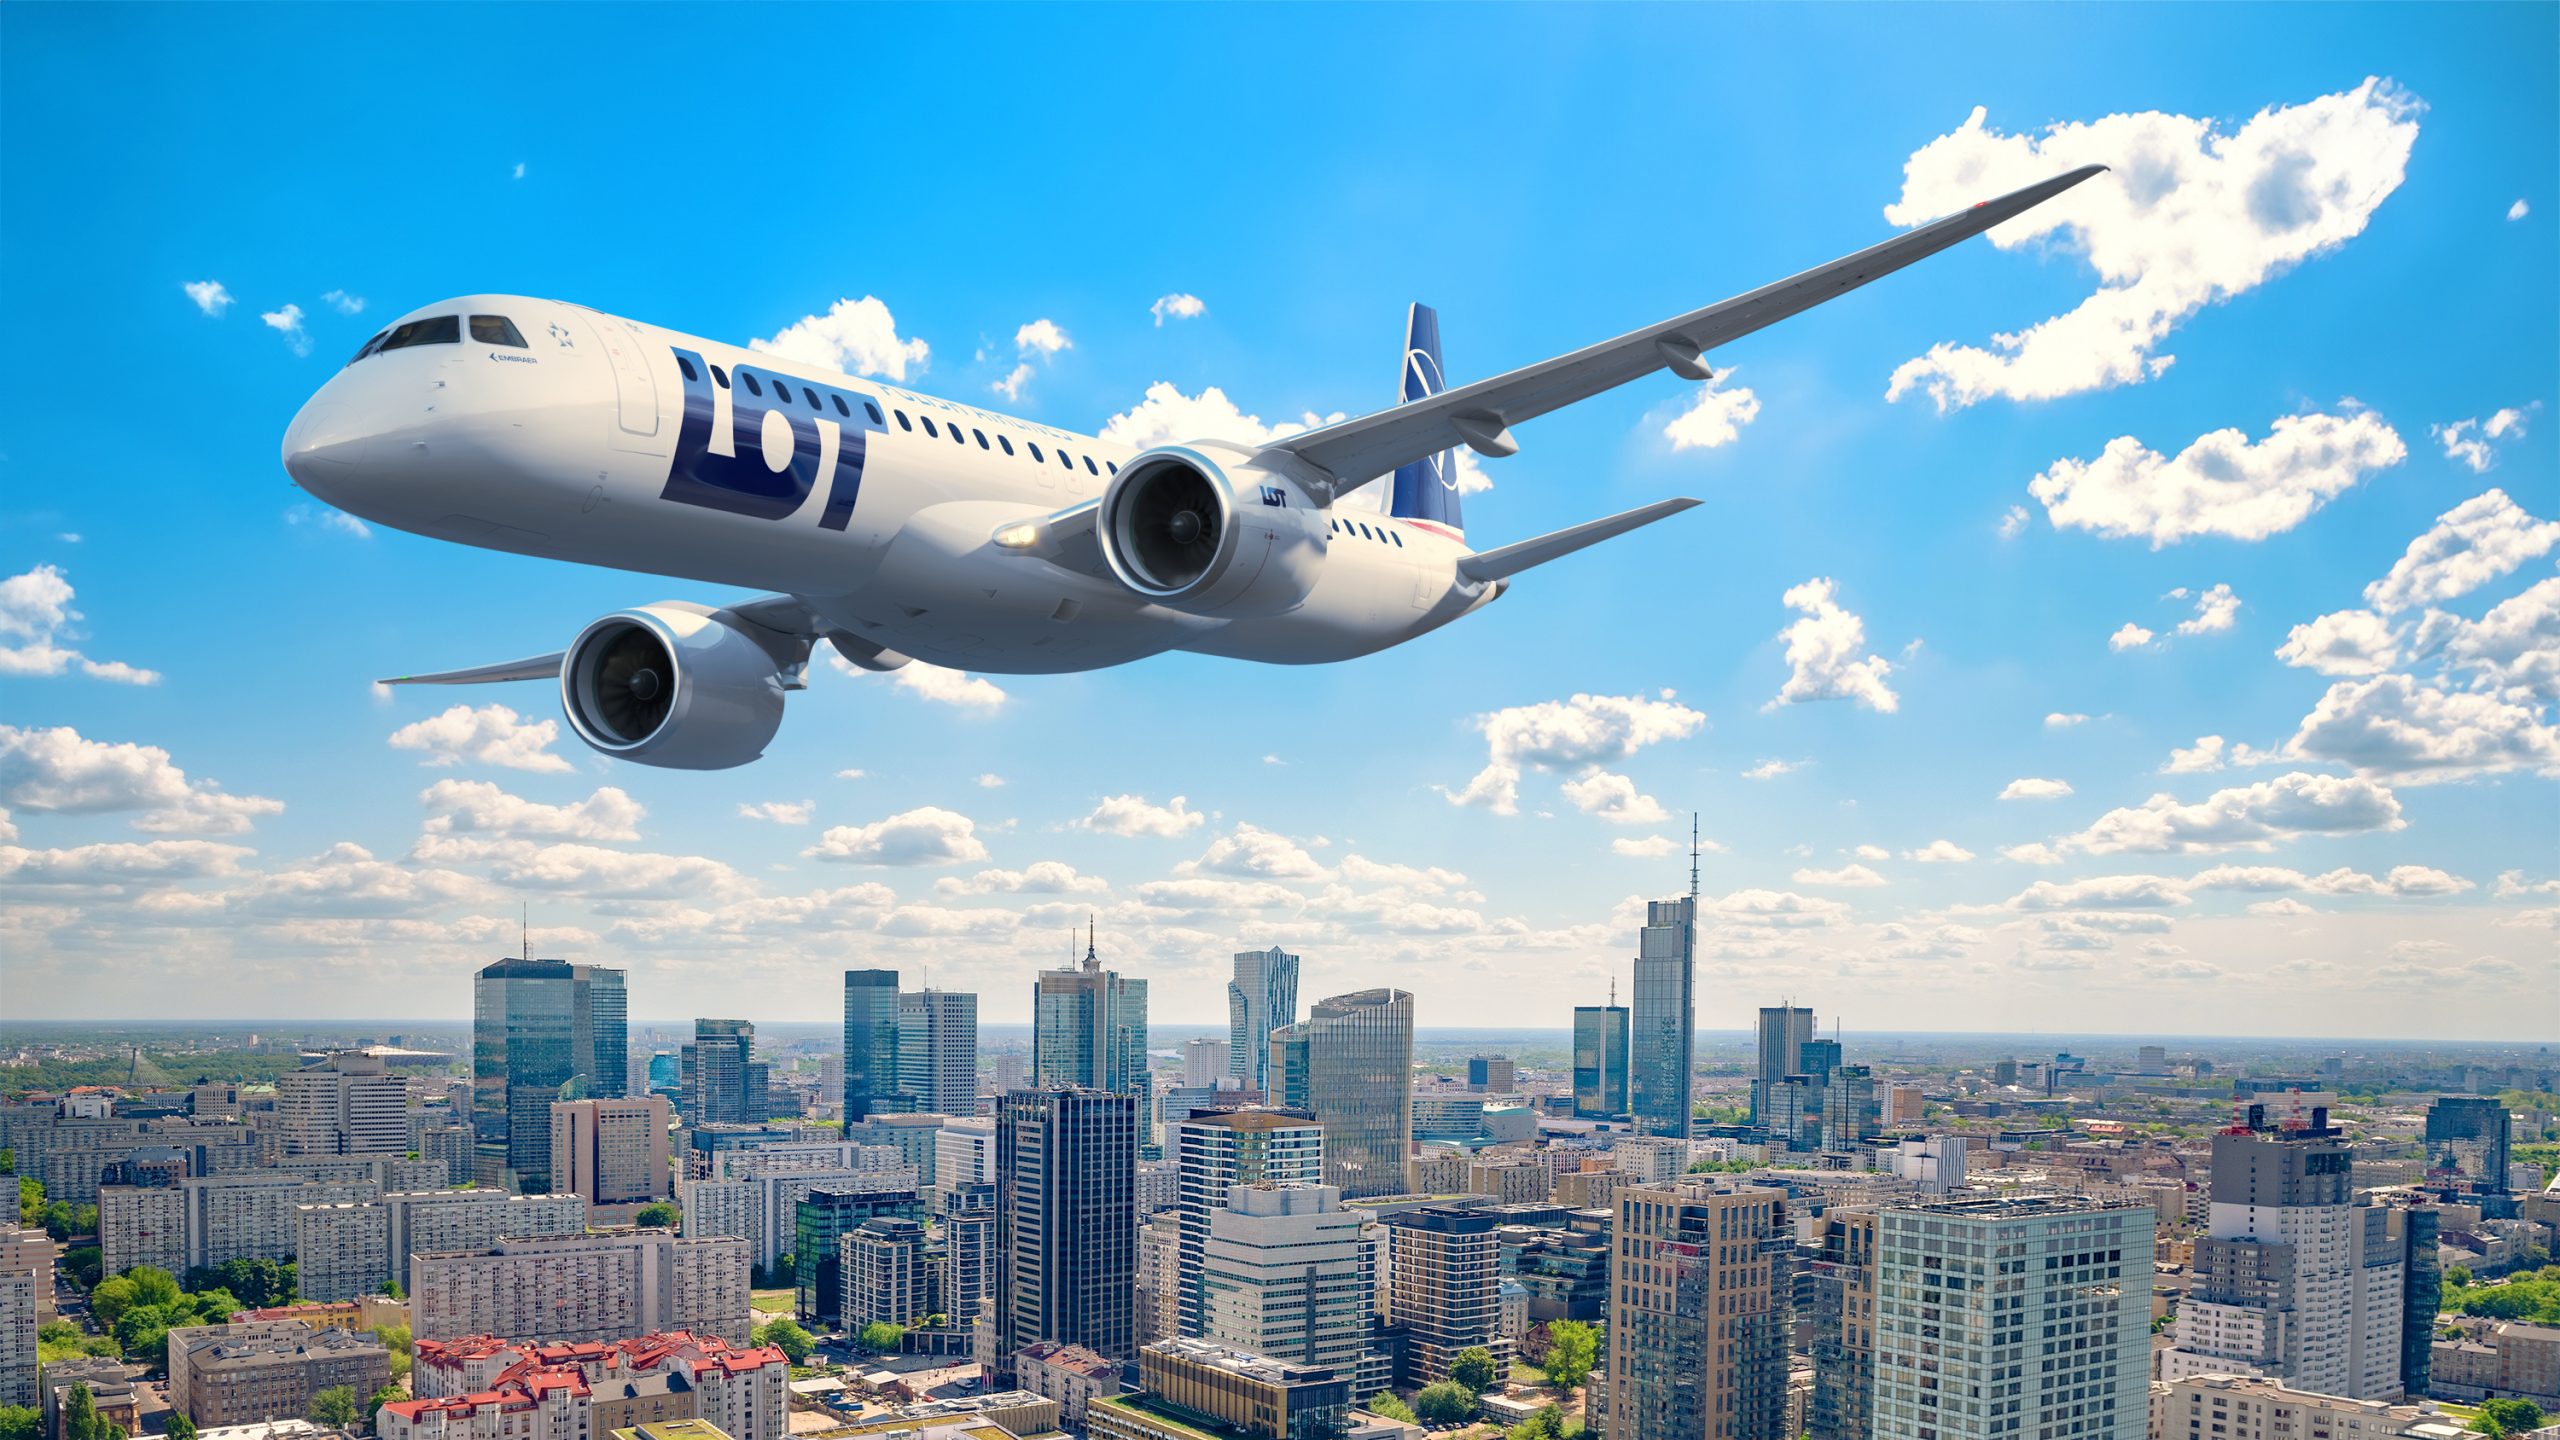 LOT Polish Airlines to lease three new Embraer E195-E2 aircraft